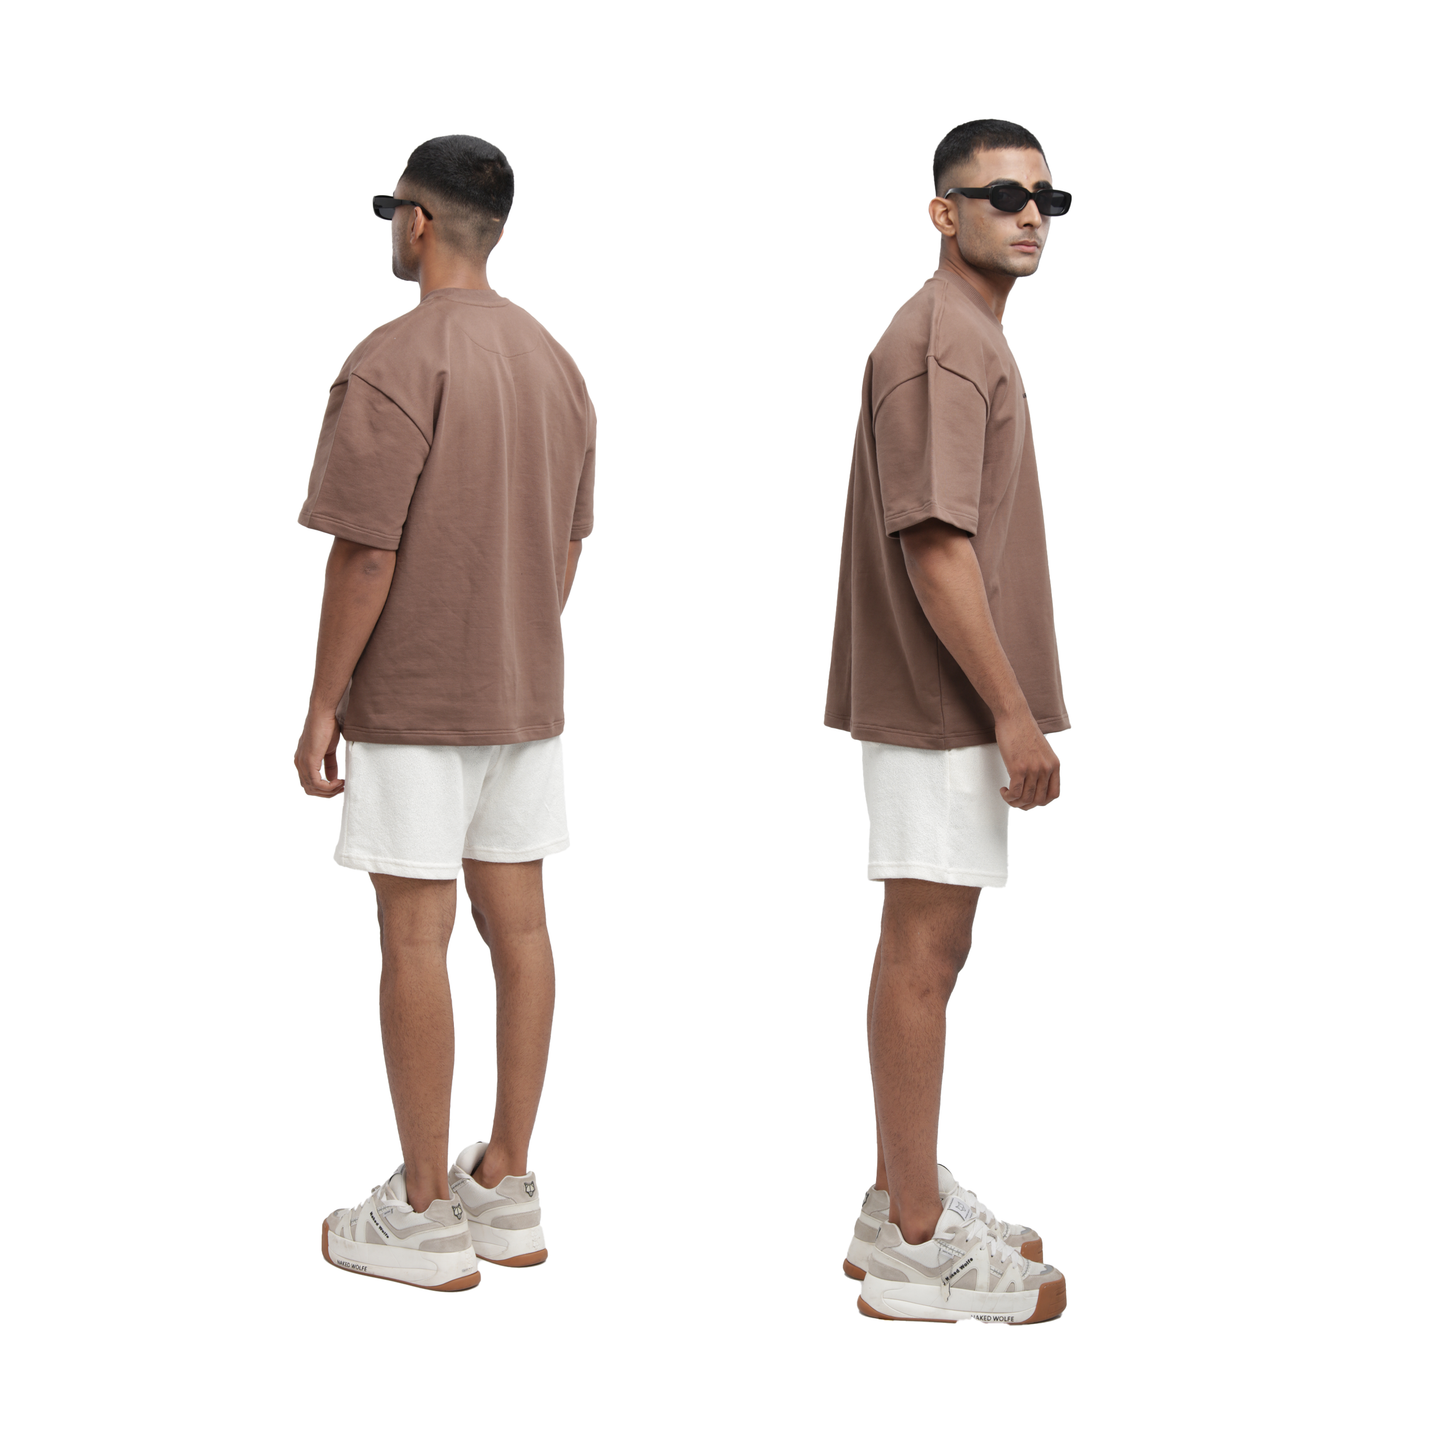 model, editorial, shorts, half sleevs, basic tshirt, brown, espresso brown, streetwear, shorts, streetstyle, summer outfit inspiration, people also ask 